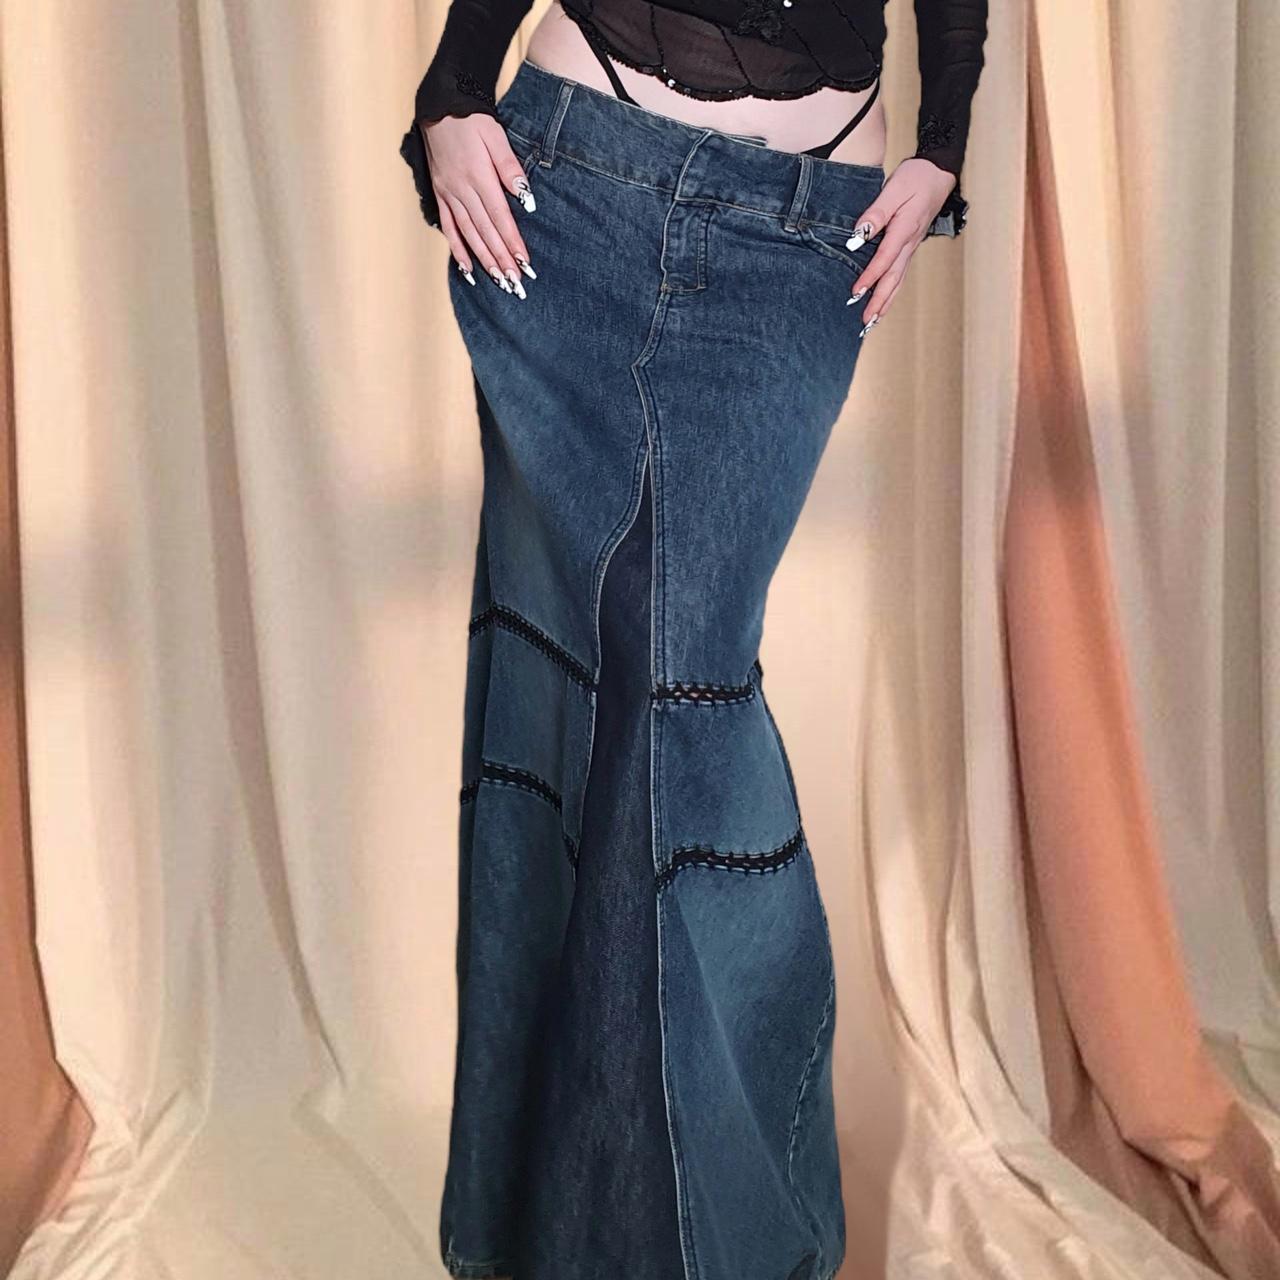 Patched Denim Maxi Skirt, Flared Mermaid Style Jean Skirt, Frayed  Redesigned Patchwork Denim Maxi Skirt, Women's Plus Size - Etsy Israel